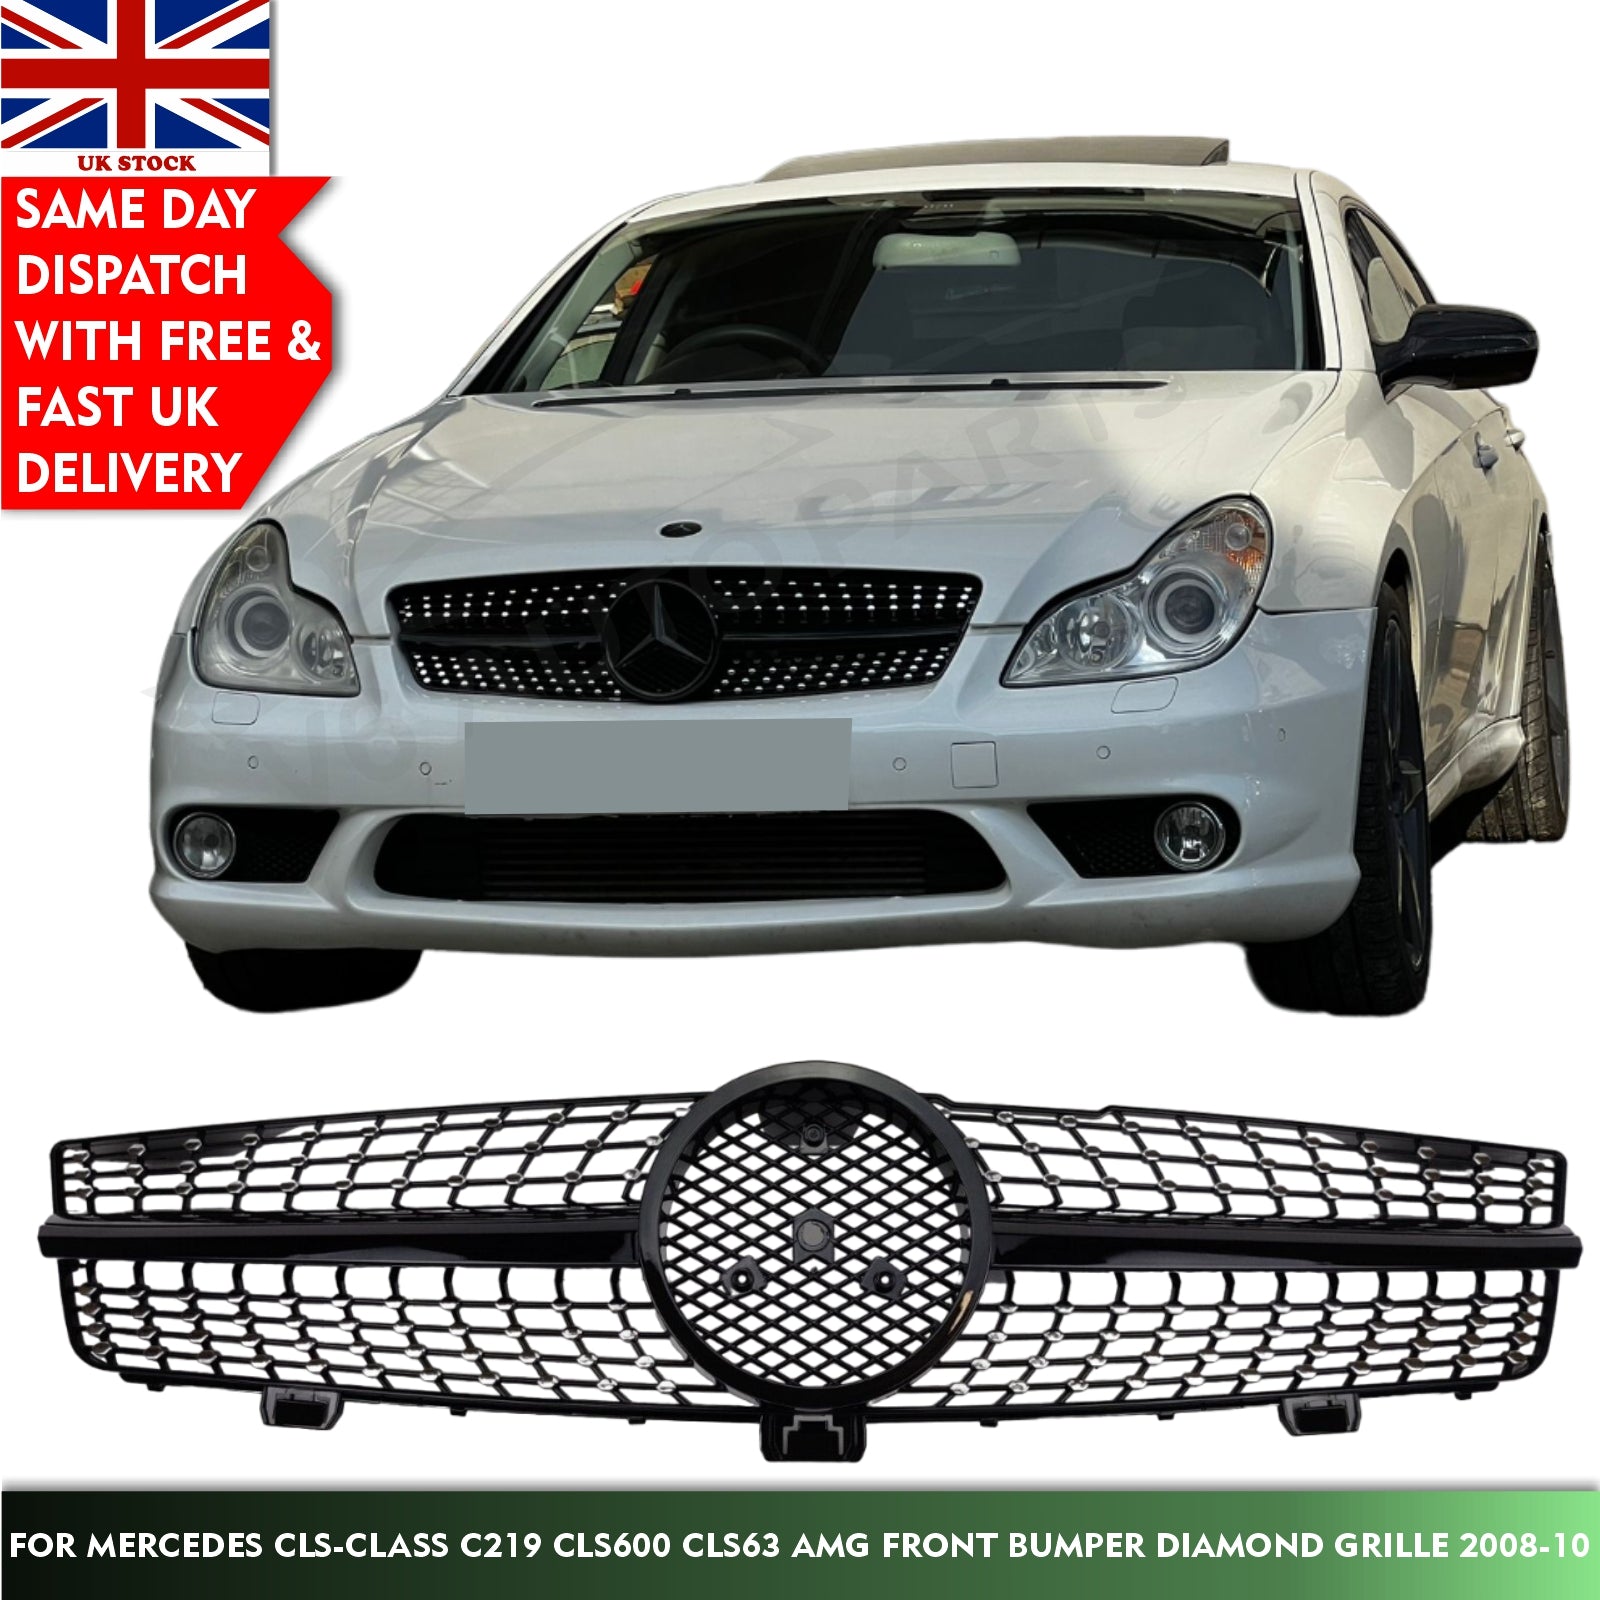 For Mercedes CLS-Class W219 C219 CLS500 CLS55 AMG Front Radiator Grille 2008-10